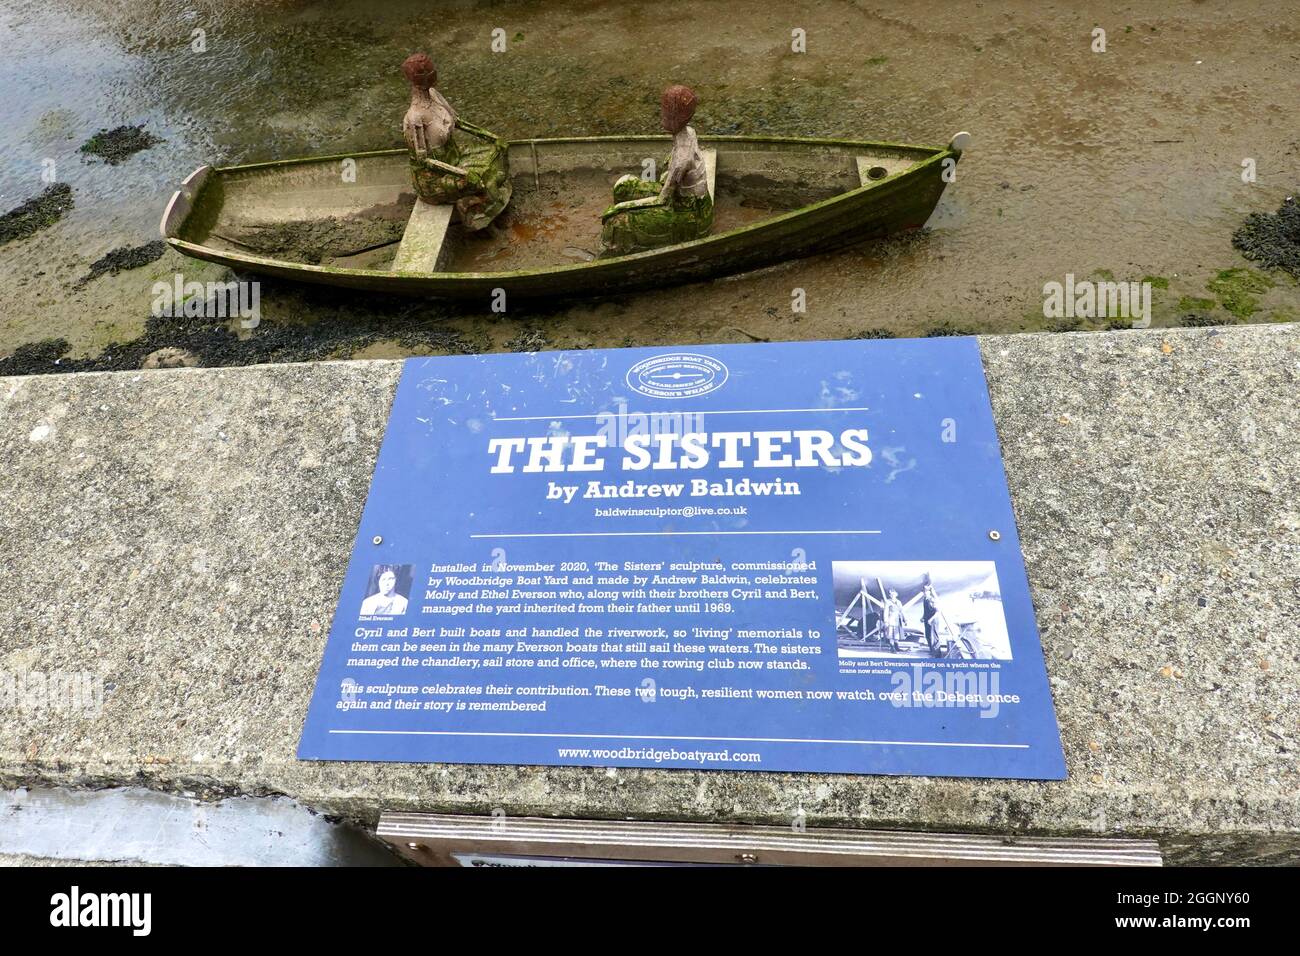 Woodbridge, Suffolk, UK - 2 September 2021: The Sisters by Andrew Baldwin celebrating the Eversons, owners of Eversons boatyard. Stock Photo